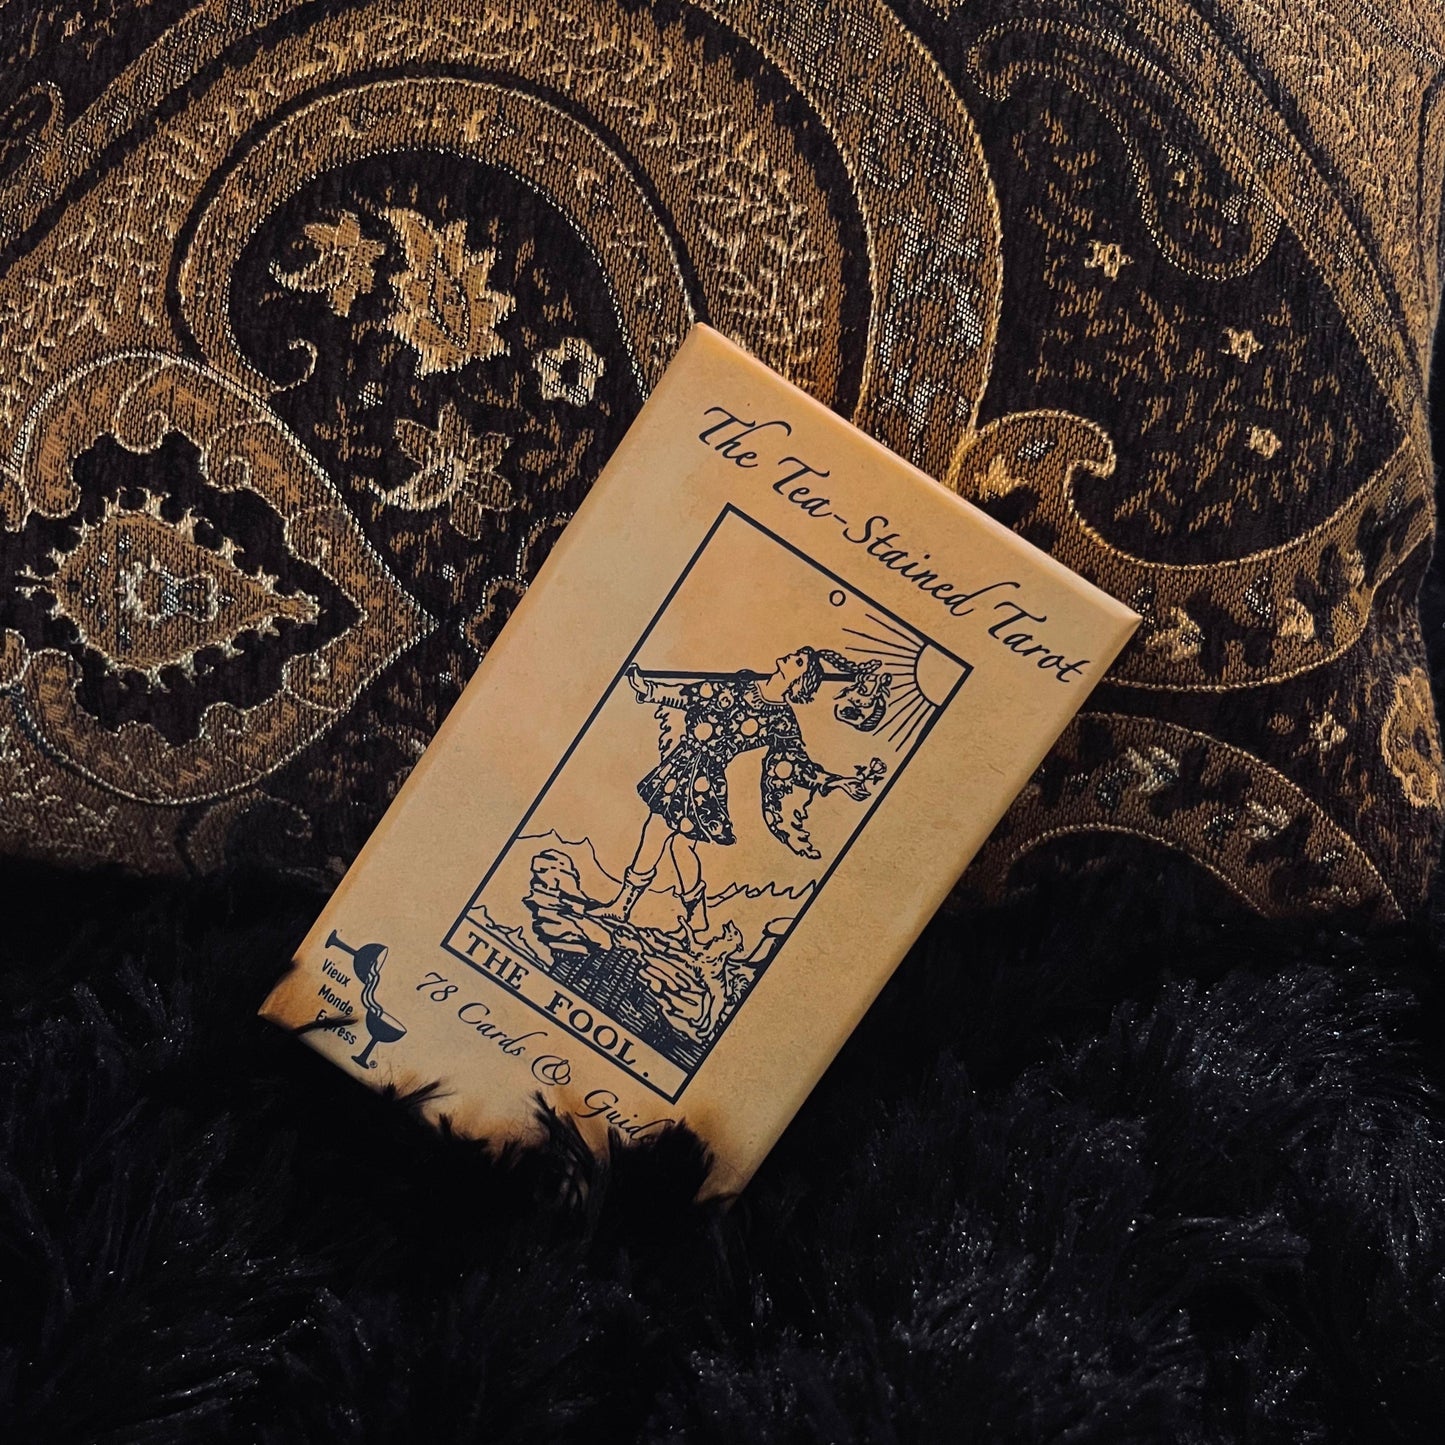 The Tea-Stained Tarot Deck